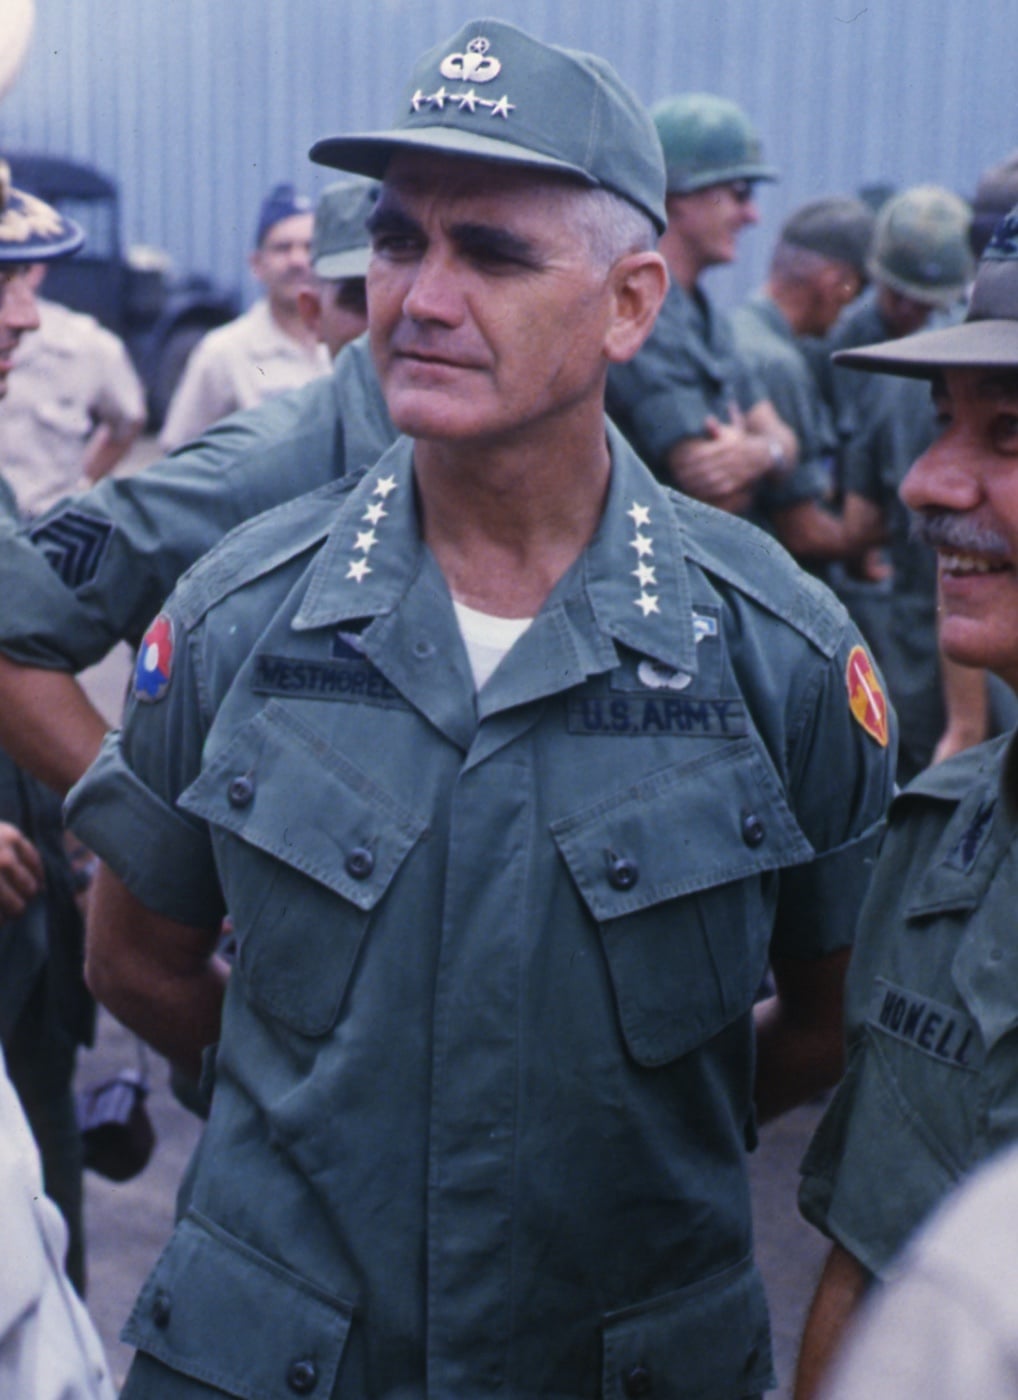 This is a photo of U.S. General William C. Westmoreland watching the arrival ceremonies for the Queen's Cobra, the Royal Thai Volunteer Regiment in Vietnam. Taken in 1967, the photo showed the cooperation between all of the allied forces during Hanoi's war on its souther neighbor. Thai troops were said to be some of the hardest fighters during the guerrilla war.